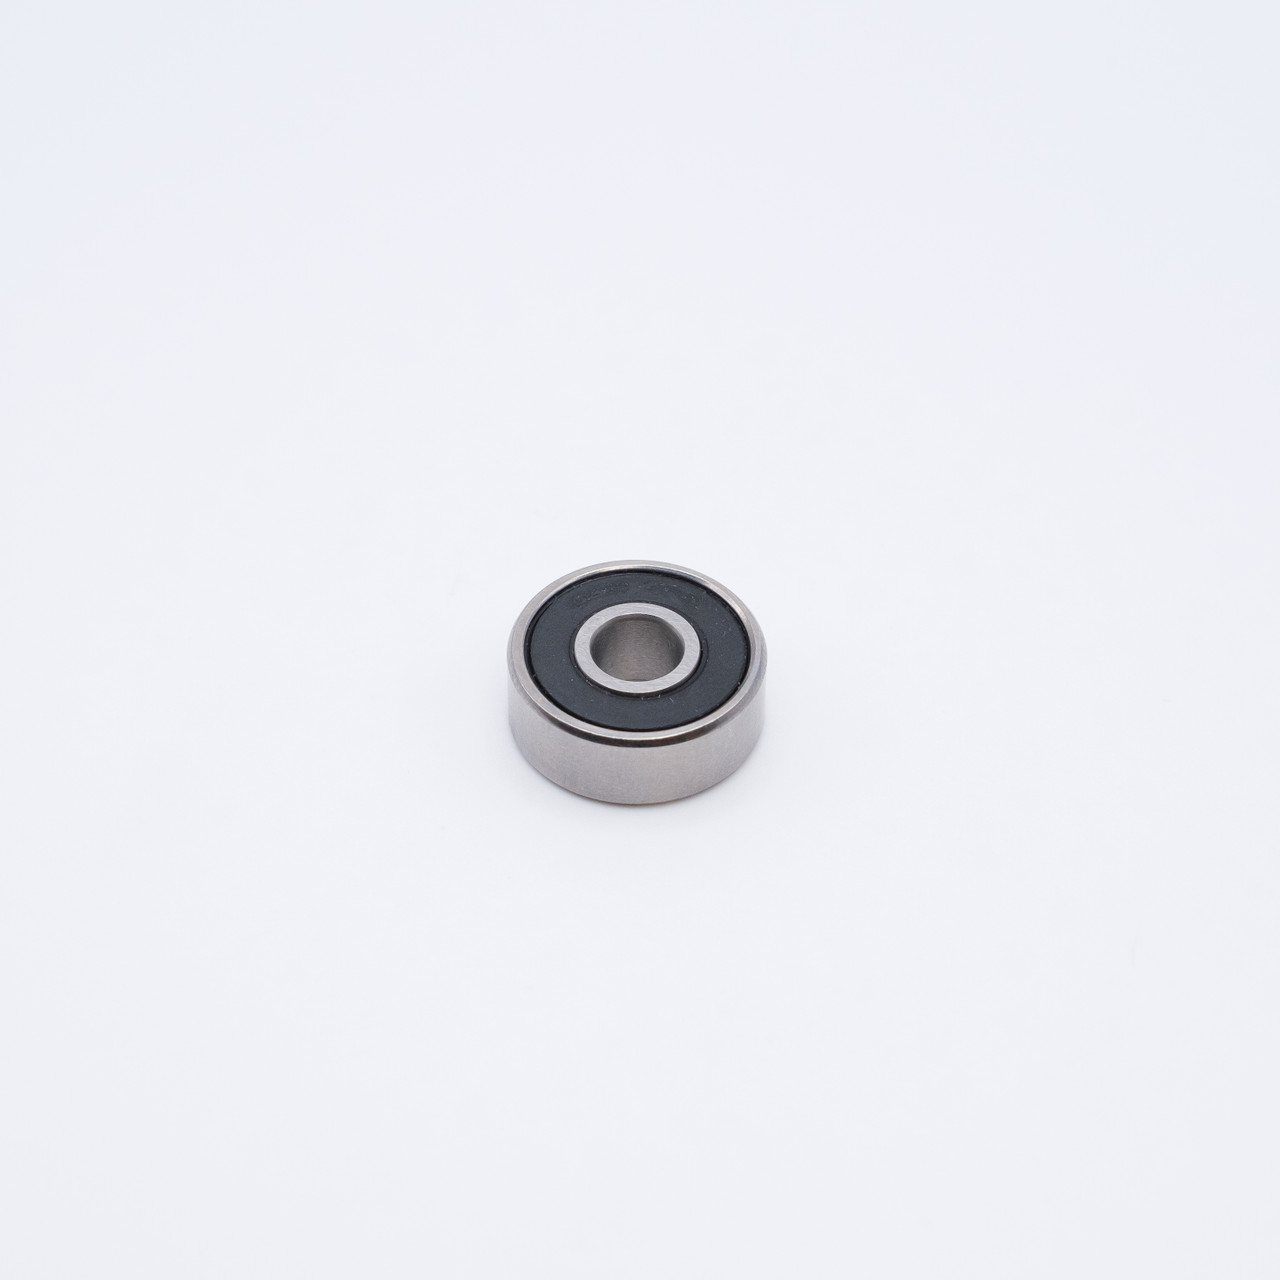 627-2RS Miniature Ball Bearing 7x22x7 Sealed MR627-2RS Top View